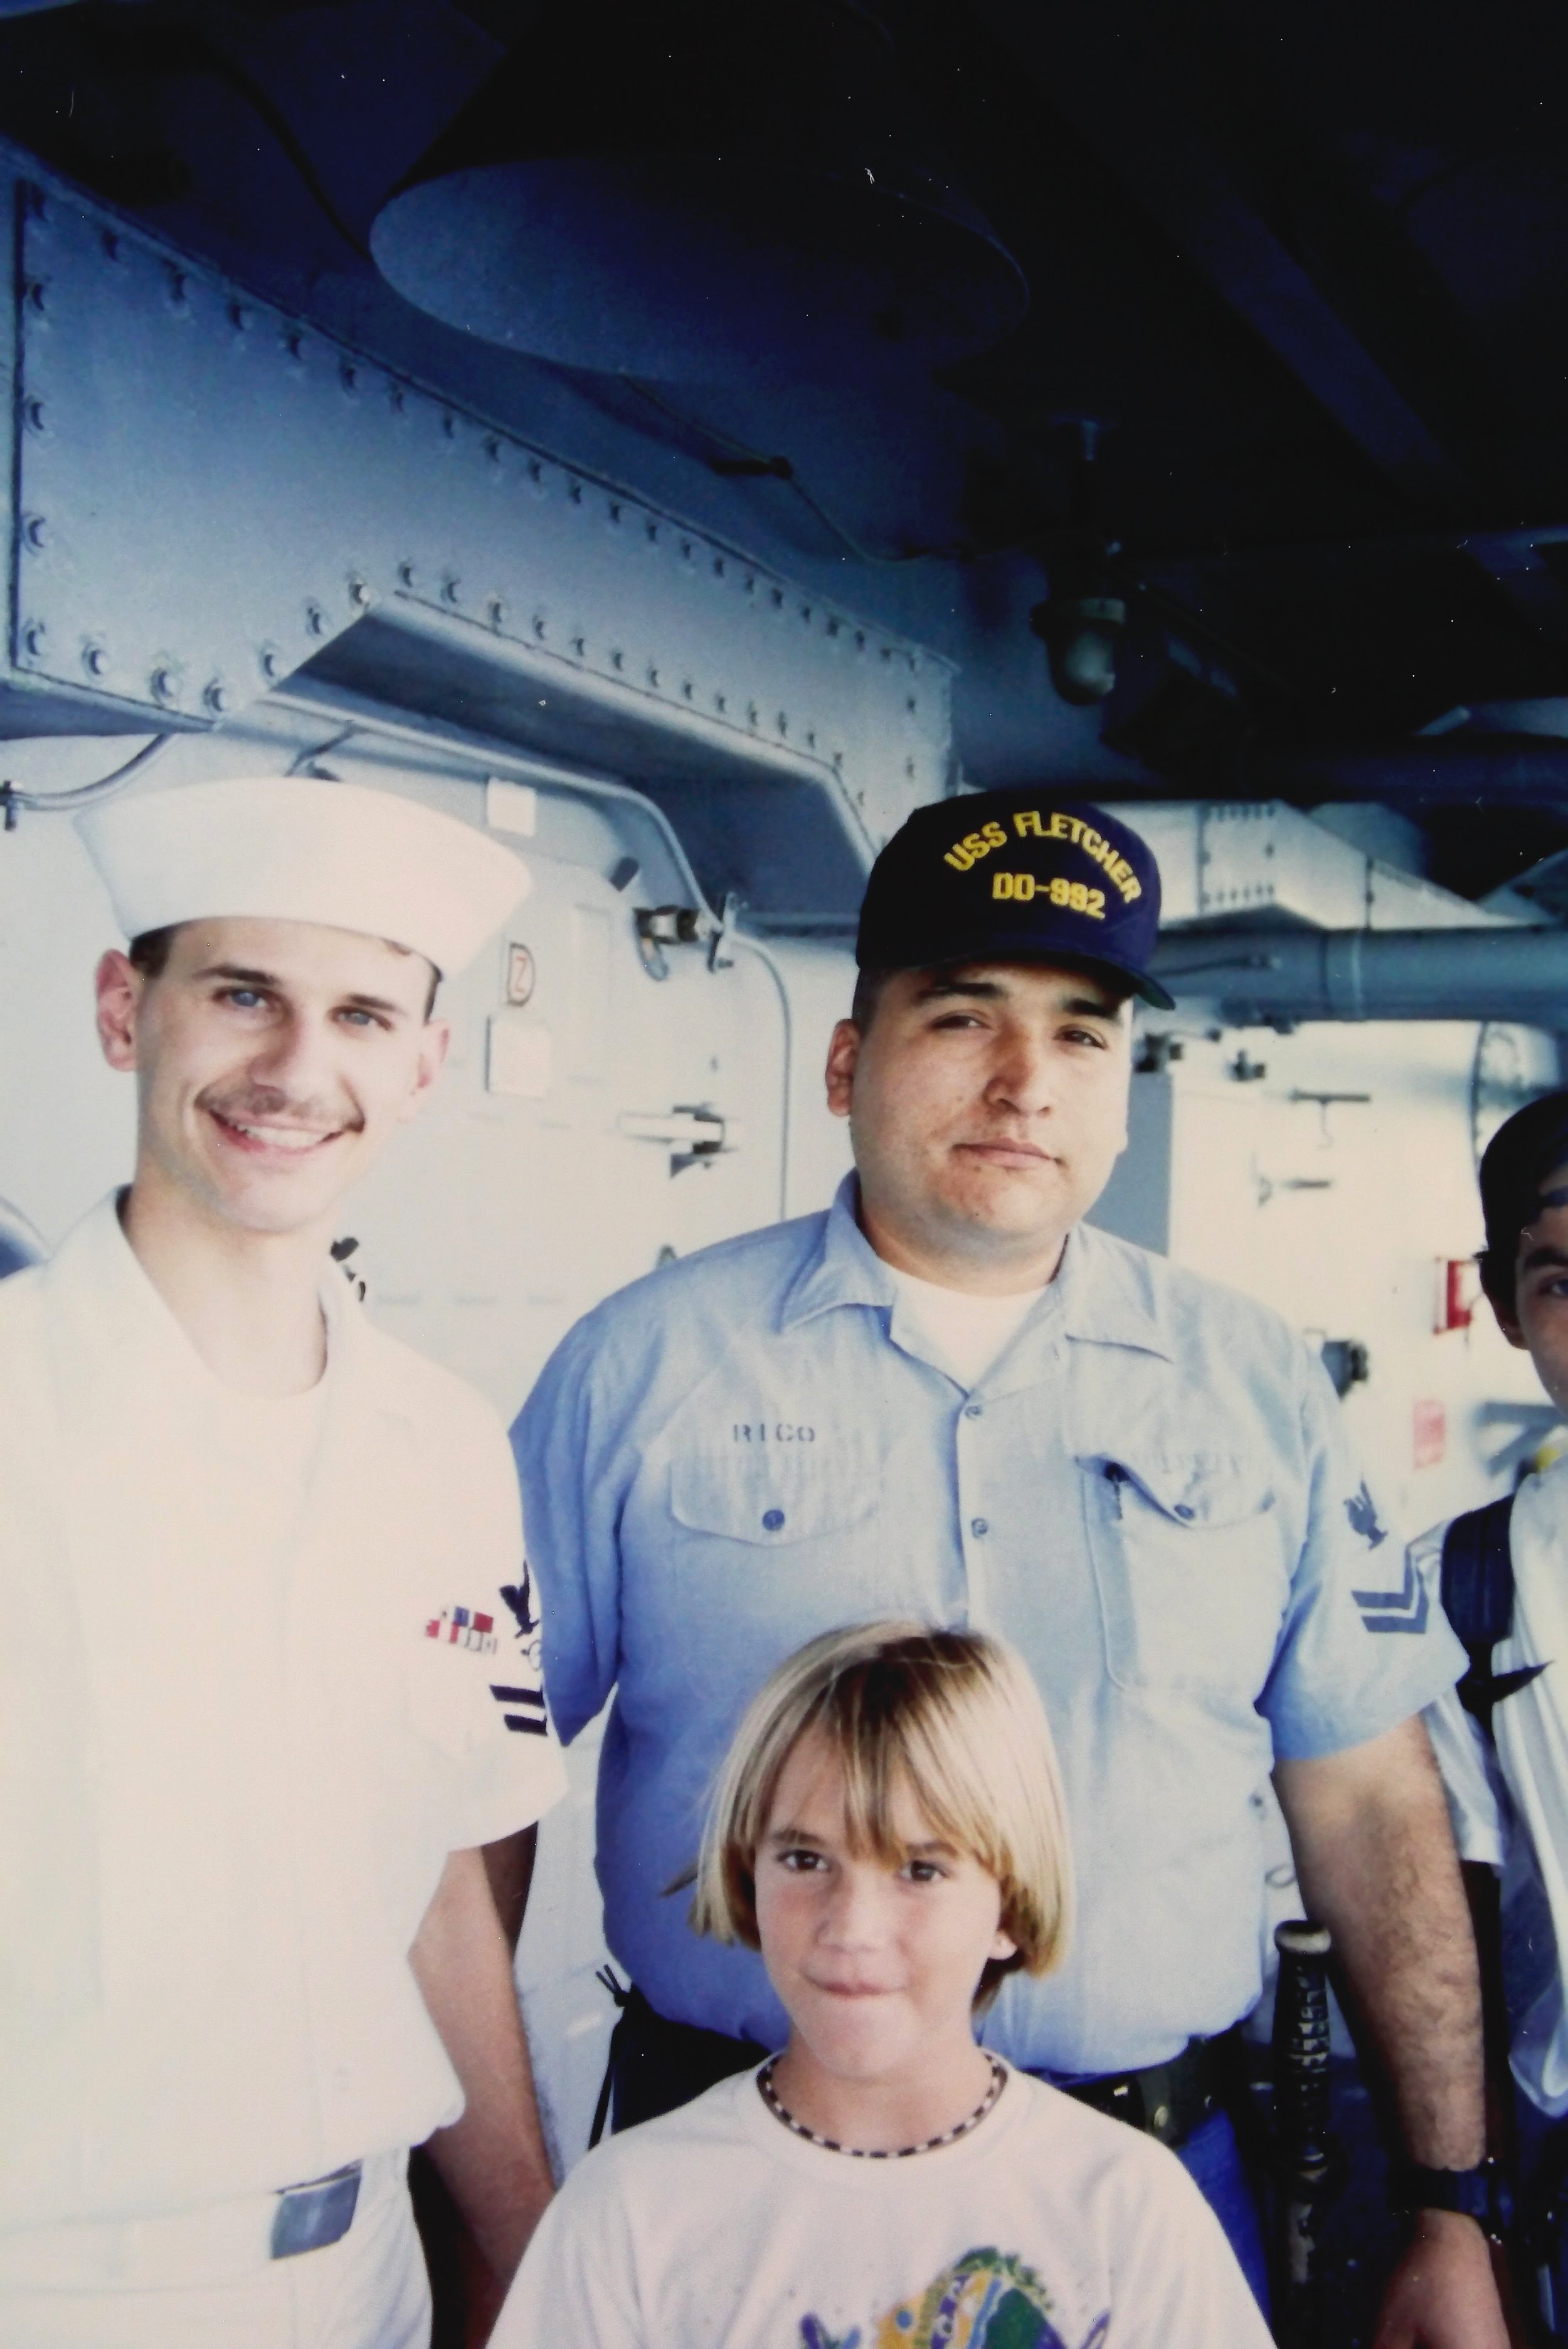 Brian, myself, and other crew aboard the USS Fletcher